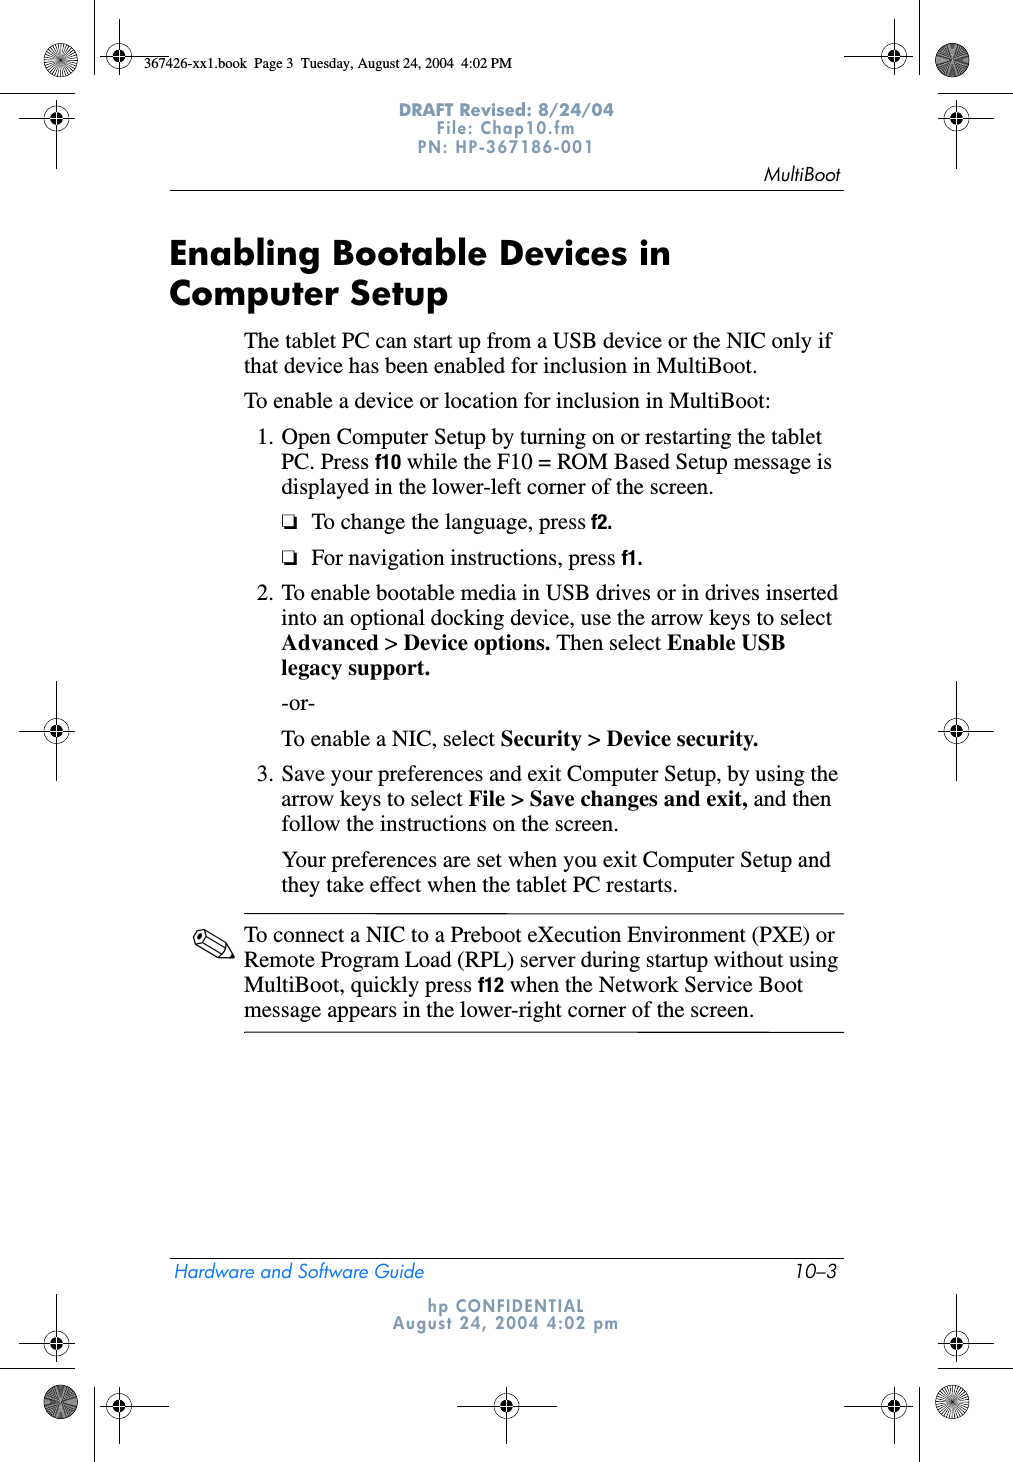 MultiBootHardware and Software Guide 10–3DRAFT Revised: 8/24/04File: Chap10.fm PN: HP-367186-001 hp CONFIDENTIALAugust 24, 2004 4:02 pmEnabling Bootable Devices in Computer SetupThe tablet PC can start up from a USB device or the NIC only if that device has been enabled for inclusion in MultiBoot.To enable a device or location for inclusion in MultiBoot:1. Open Computer Setup by turning on or restarting the tablet PC. Press f10 while the F10 = ROM Based Setup message is displayed in the lower-left corner of the screen.❏To change the language, press f2.❏For navigation instructions, press f1.2. To enable bootable media in USB drives or in drives inserted into an optional docking device, use the arrow keys to select Advanced &gt; Device options. Then select Enable USB legacy support.-or-To enable a NIC, select Security &gt; Device security.3. Save your preferences and exit Computer Setup, by using the arrow keys to select File &gt; Save changes and exit, and then follow the instructions on the screen.Your preferences are set when you exit Computer Setup and they take effect when the tablet PC restarts.✎To connect a NIC to a Preboot eXecution Environment (PXE) or Remote Program Load (RPL) server during startup without using MultiBoot, quickly press f12 when the Network Service Boot message appears in the lower-right corner of the screen.367426-xx1.book  Page 3  Tuesday, August 24, 2004  4:02 PM